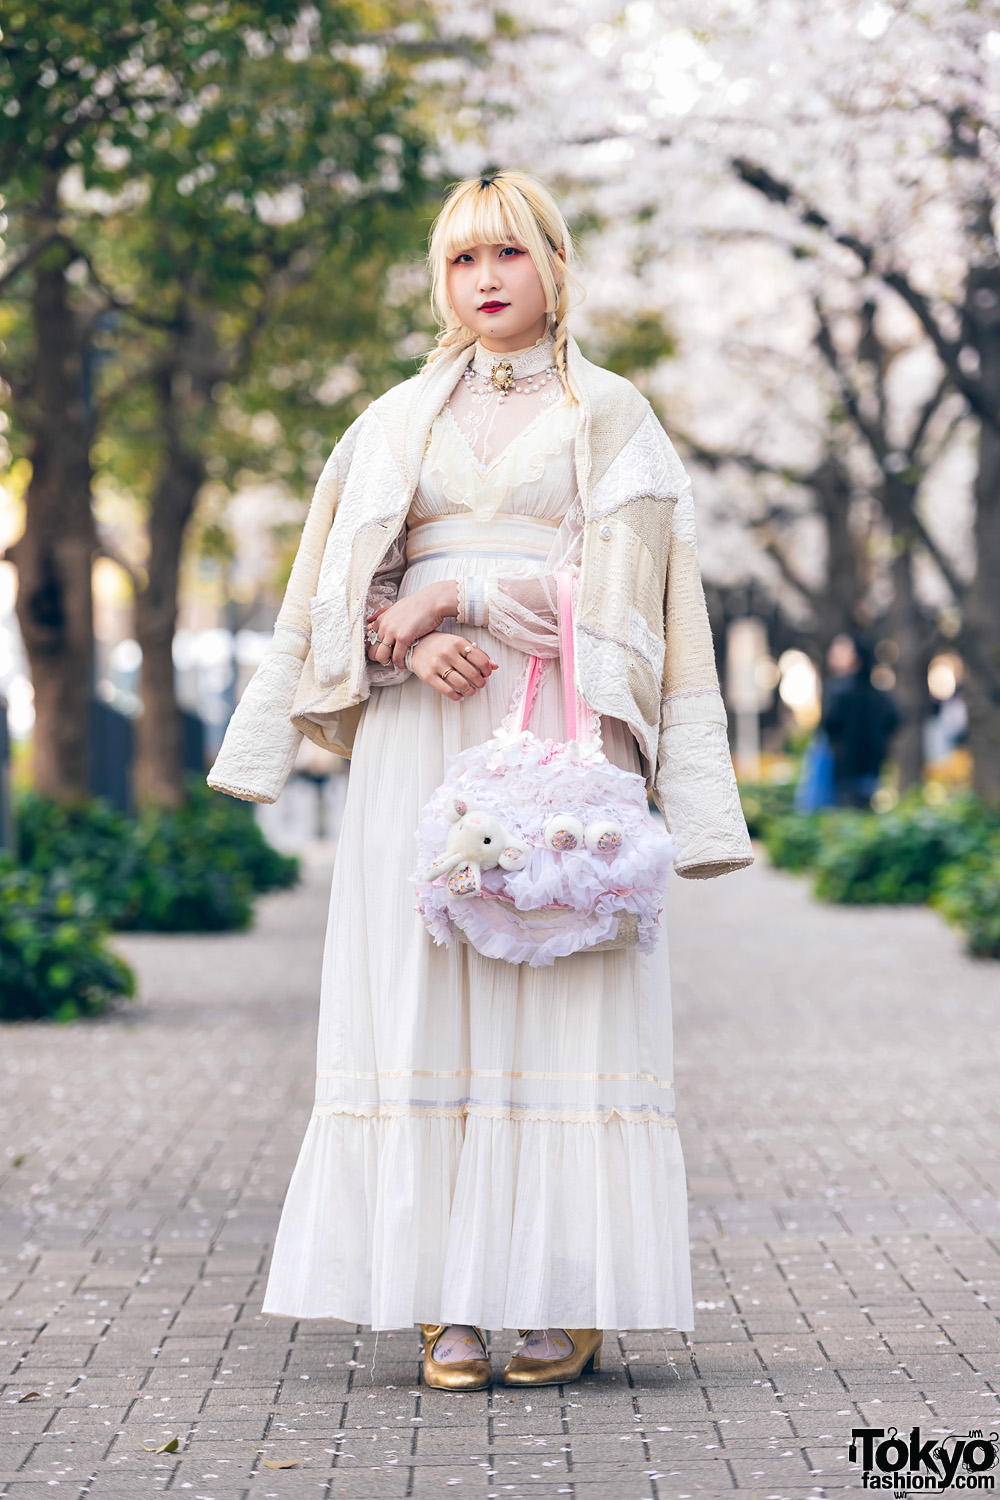 Vintage/Cult Party Kei Style with Twin Braids, Virgin Mary Patchwork Jacket, Gunne Sax Empire Cut Ruffle Dress, Nile Perch Bow Shoes & Gunifuni Rabbit Bag